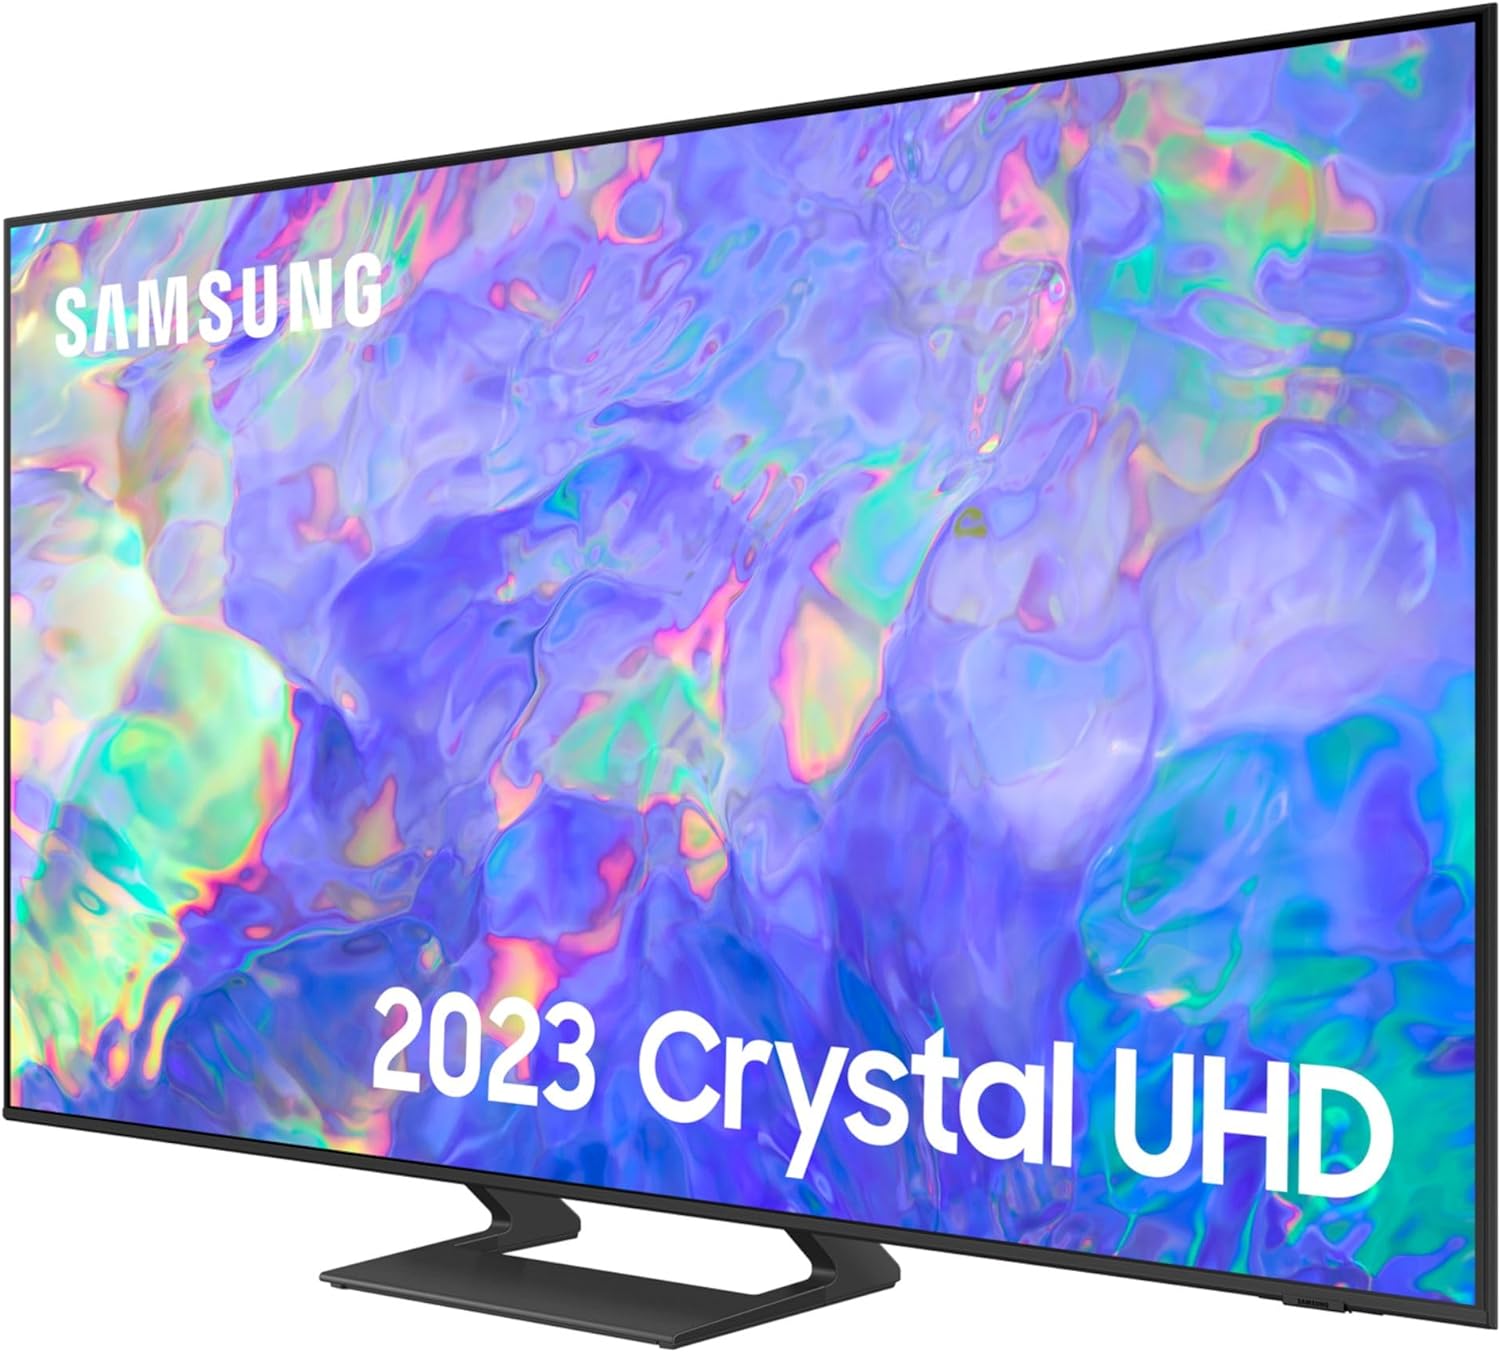 Samsung 50 Inch CU8500 4K UHD Smart TV (2023) - Air Slim Design TV With Centre Stand & Alexa Built In, 4K Crystal Processor, Object Tracking Sound, Multi View, Gaming TV Hub & Smart TV Content - Amazing Gadgets Outlet